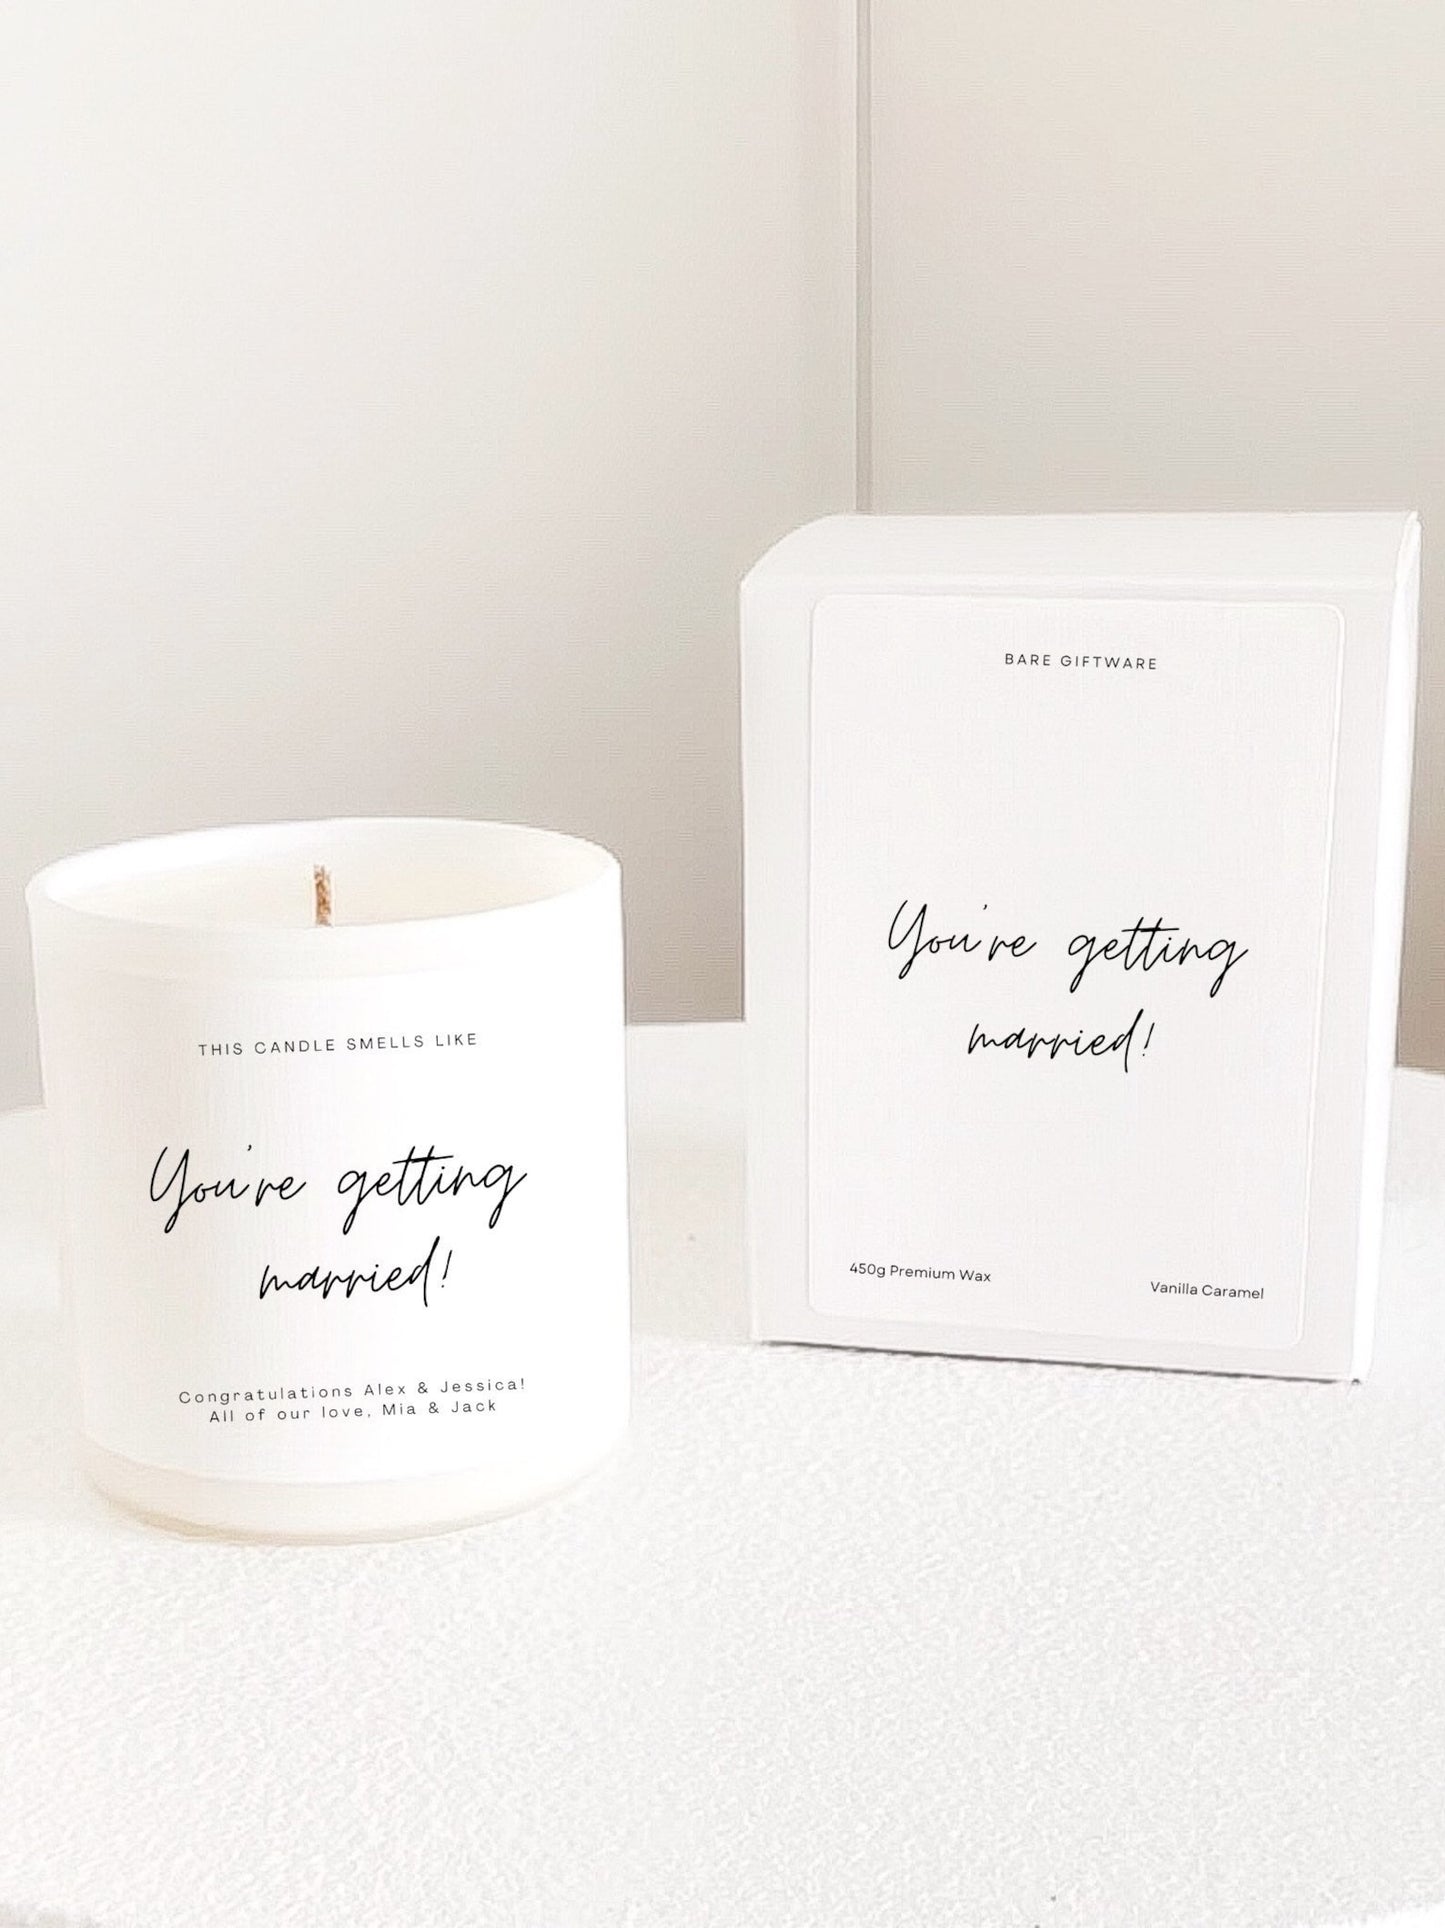 This Candle Smells Like You're Getting Married